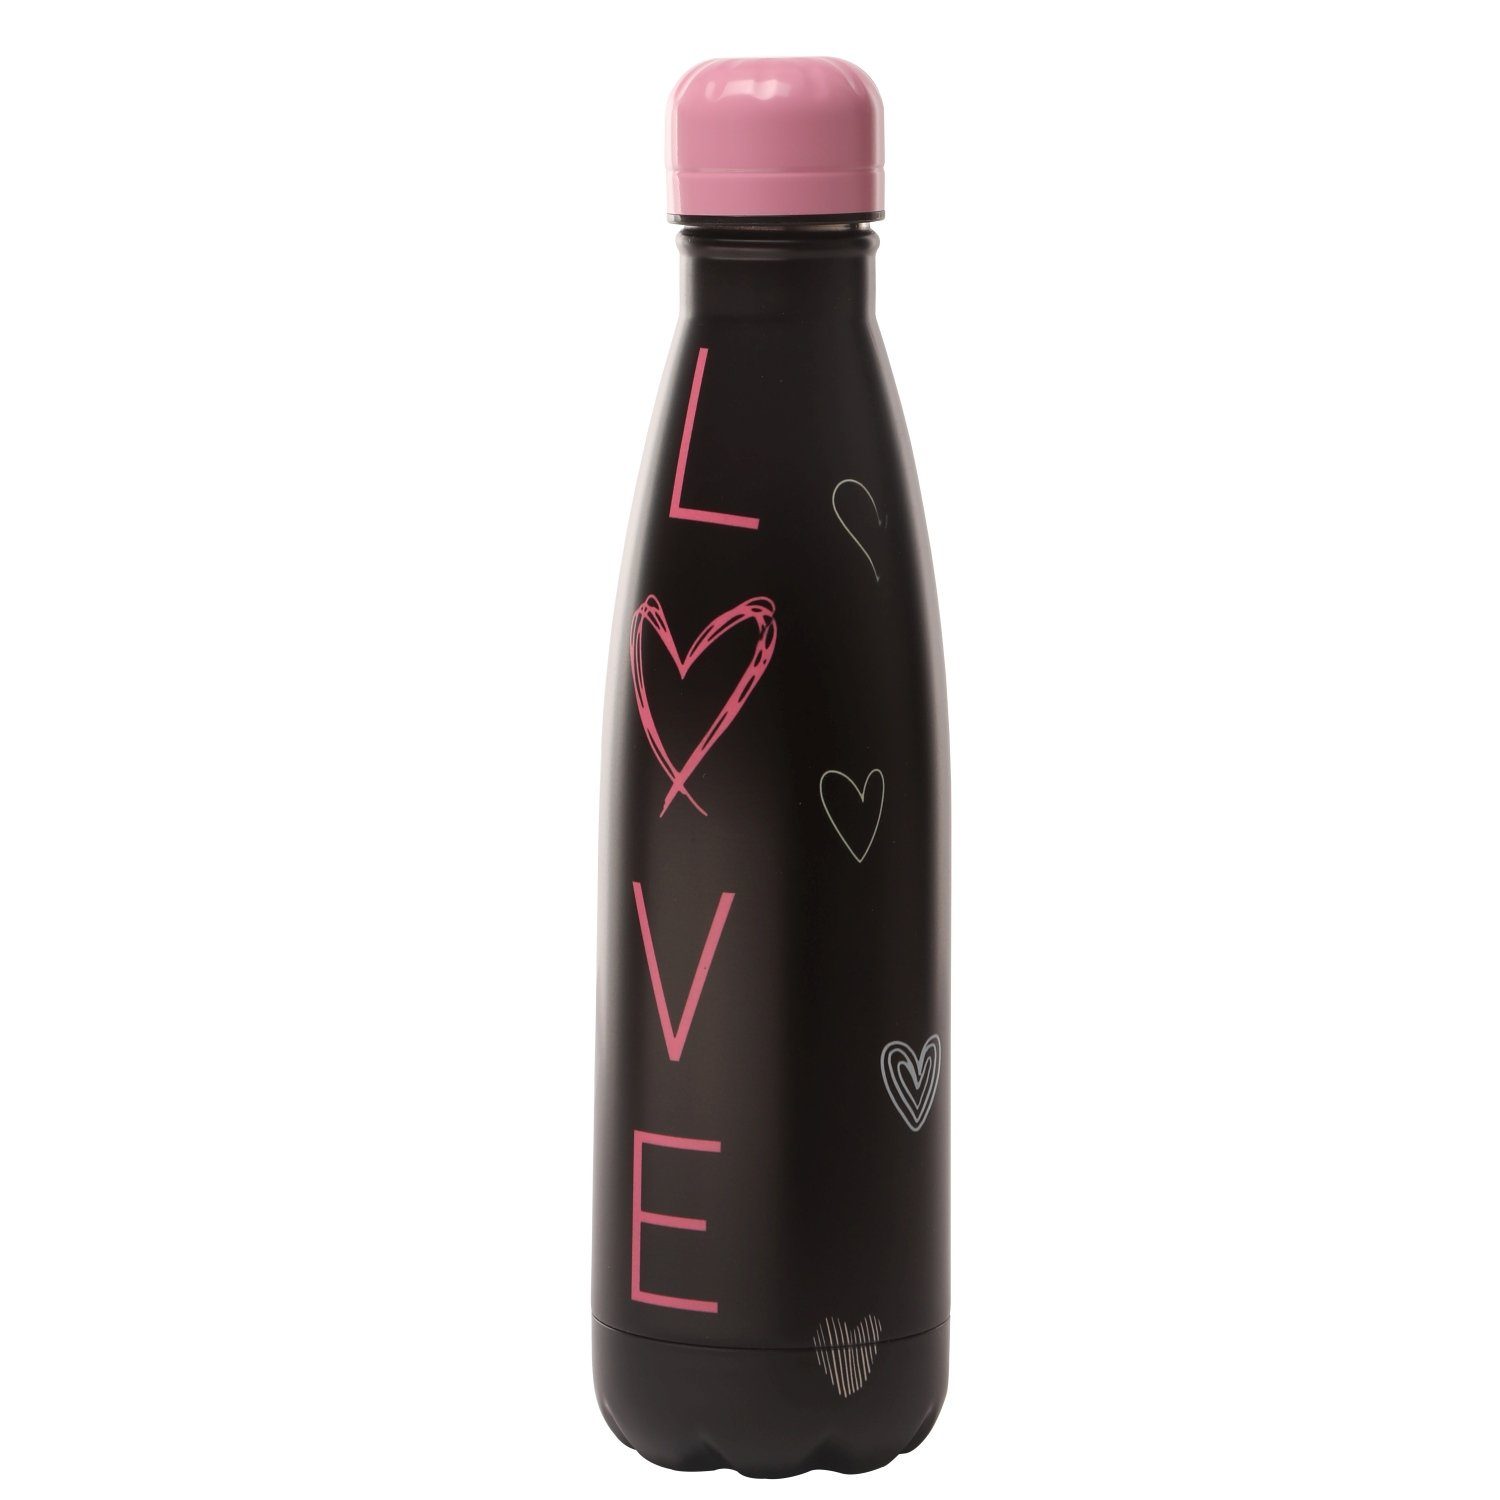 500ml Edelstahl-Trinkflasche Step Love Step Xanadoo by Youngster-Line Babystiefel